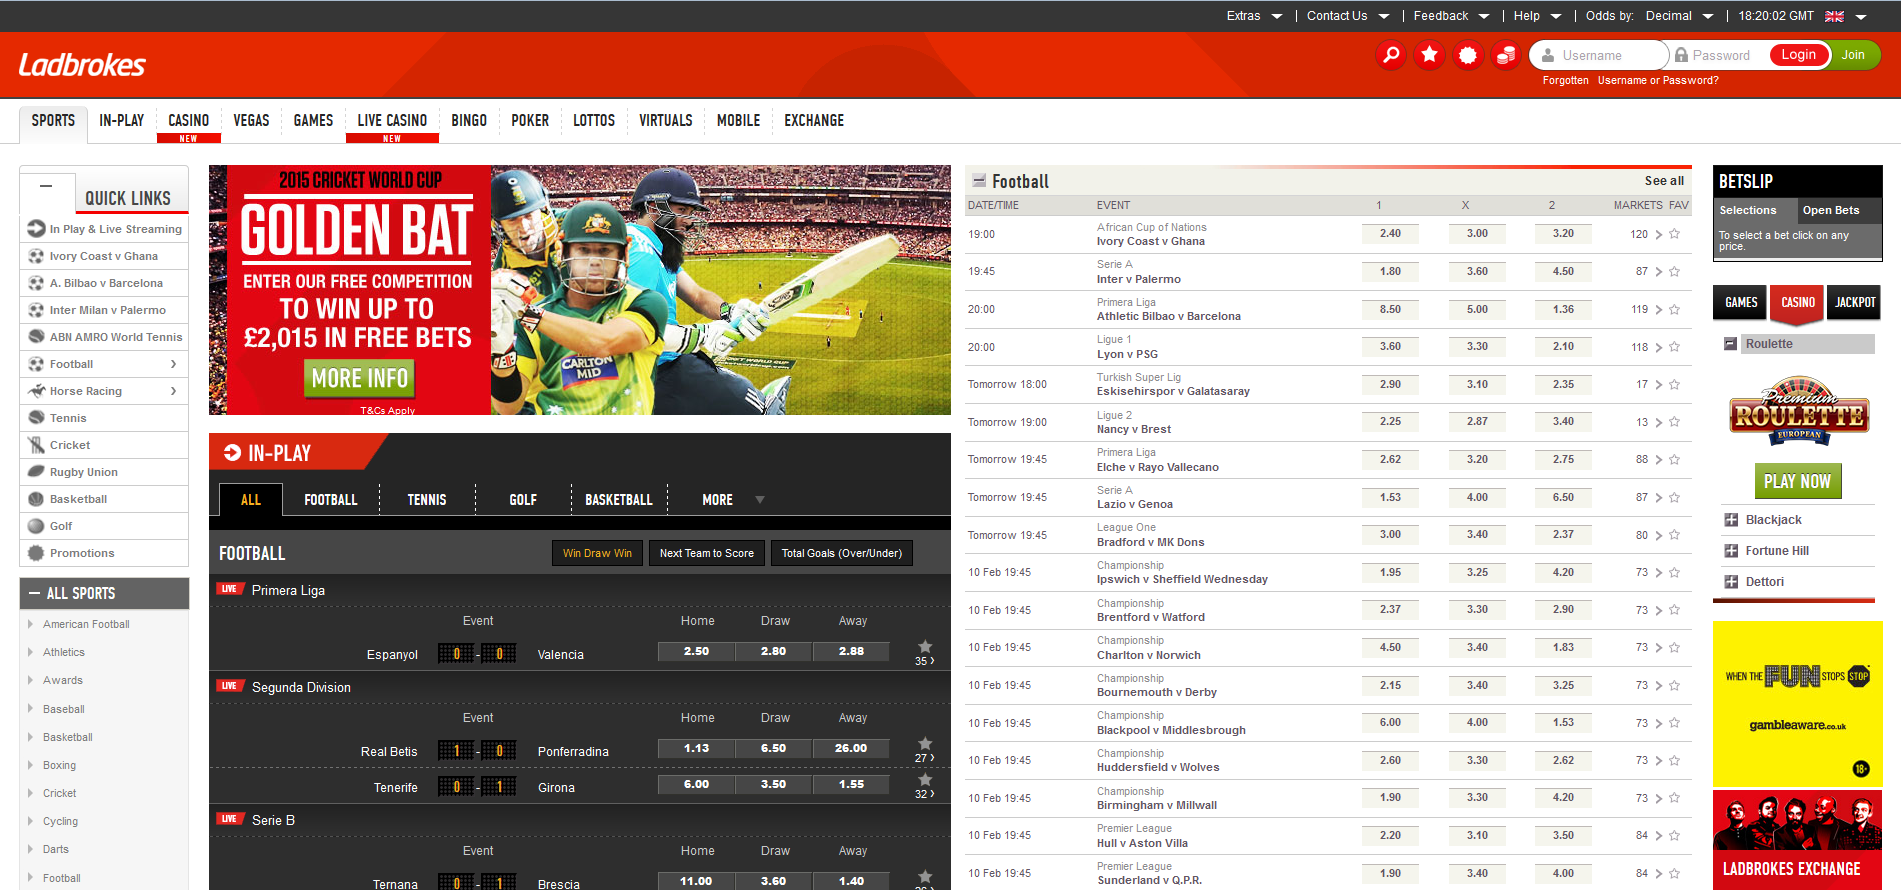 Fixed odds betting ladbrokes results forex trading kapitall